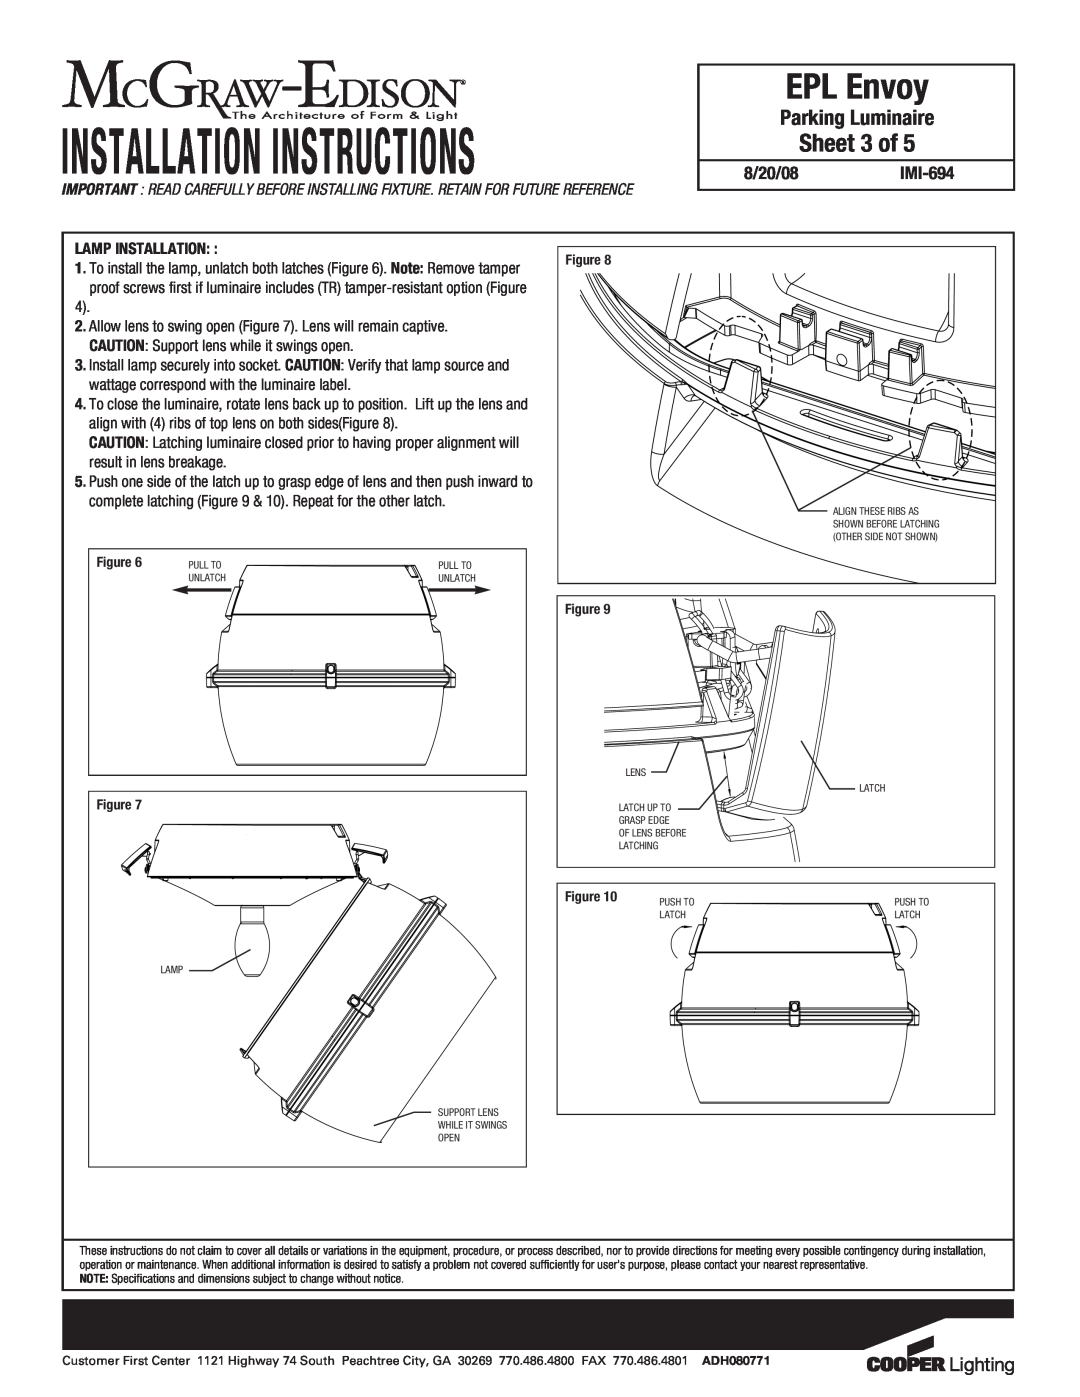 Cooper Lighting specifications Sheet 3 of, Installation Instructions, EPL Envoy, Parking Luminaire, 8/20/08IMI-694 